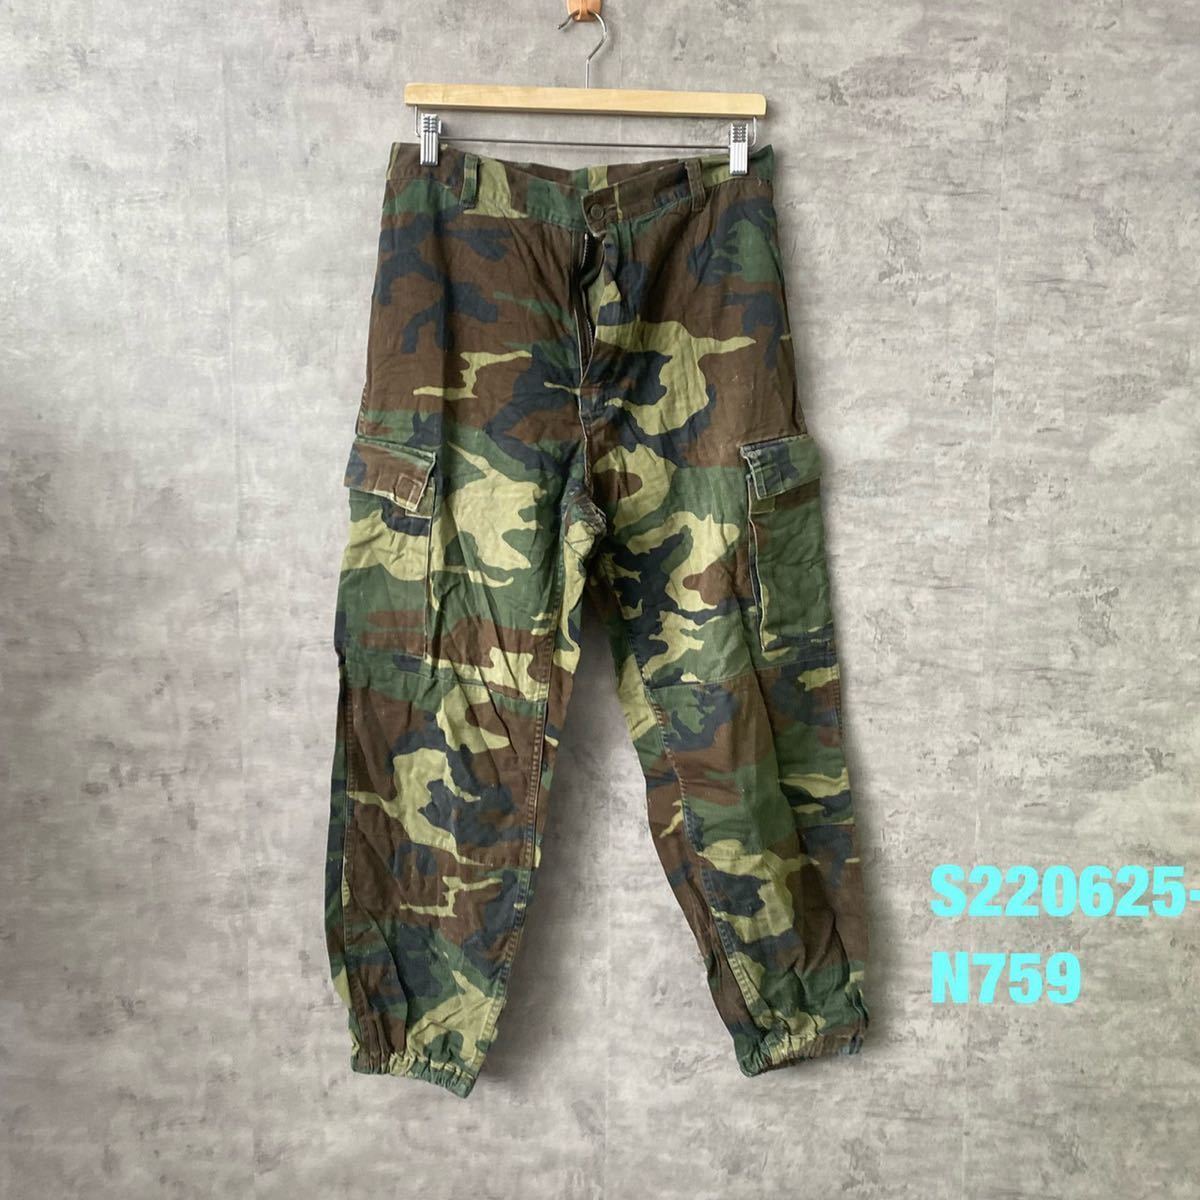  cargo pants camouflage camouflage military army bread absolute size W31in USA abroad import old clothes S220625-N759